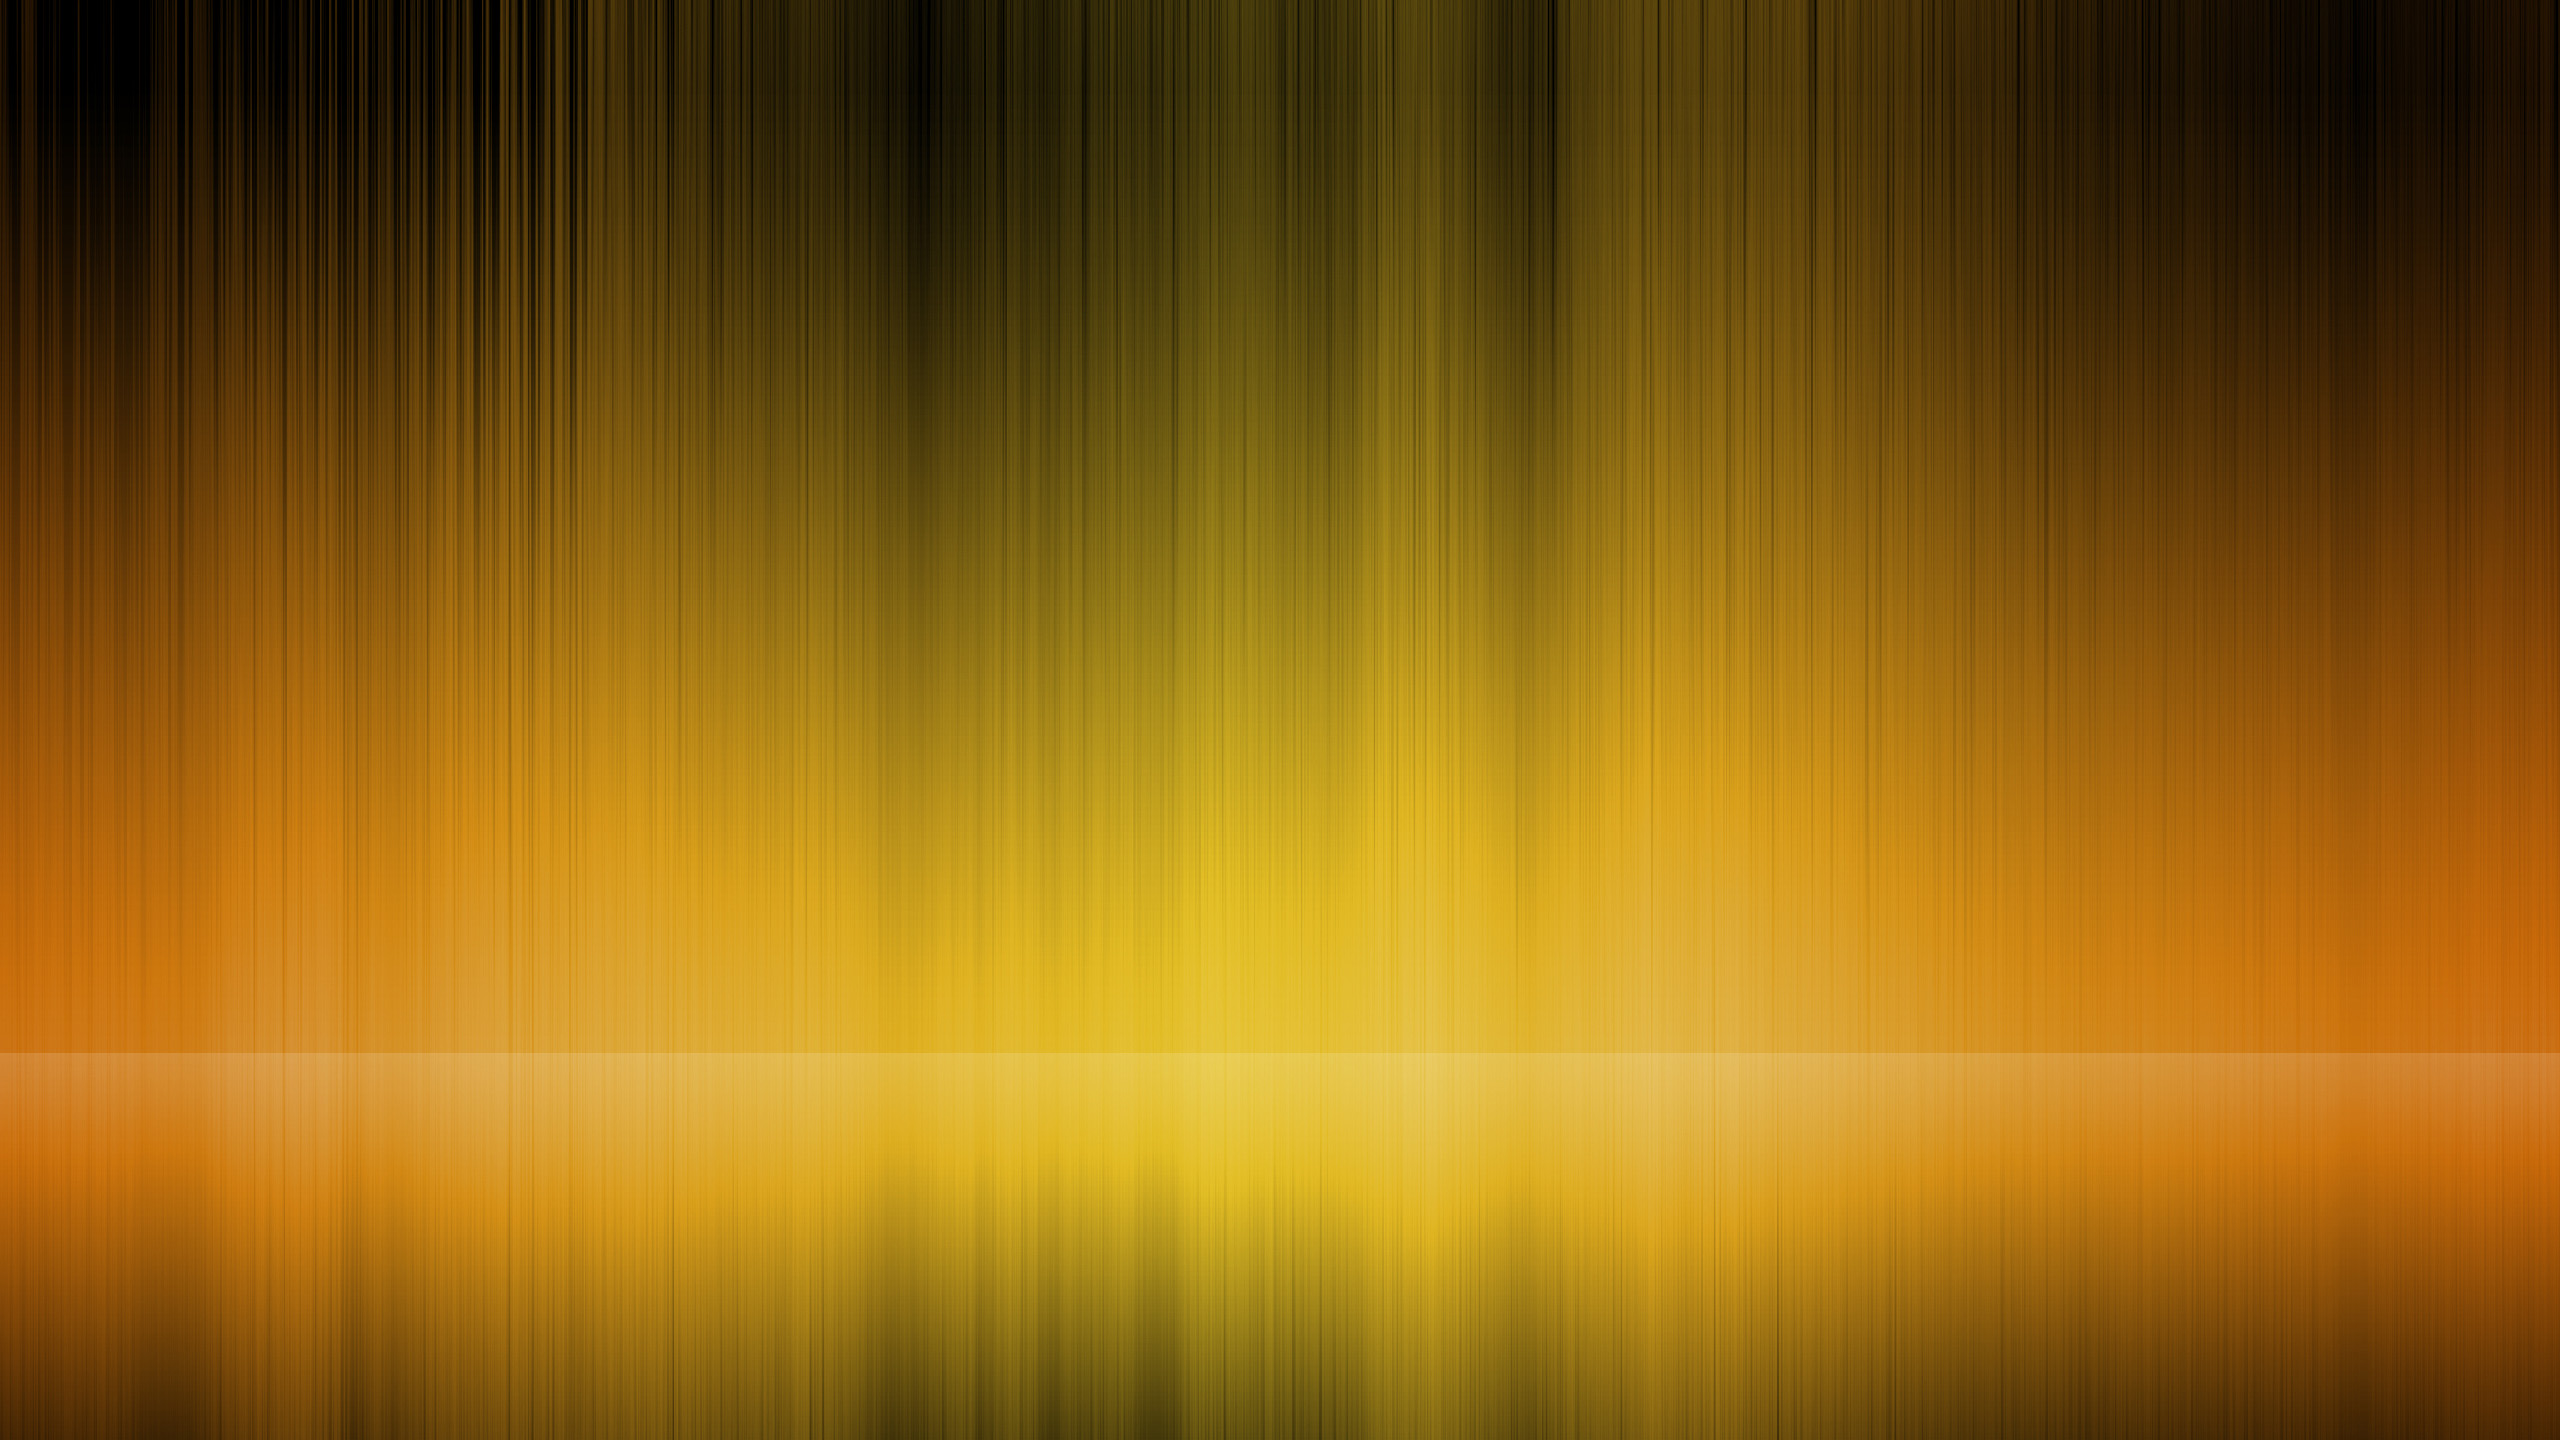 Wallpaper Details File Name Yellow Uploaded By 2x2is5 Date